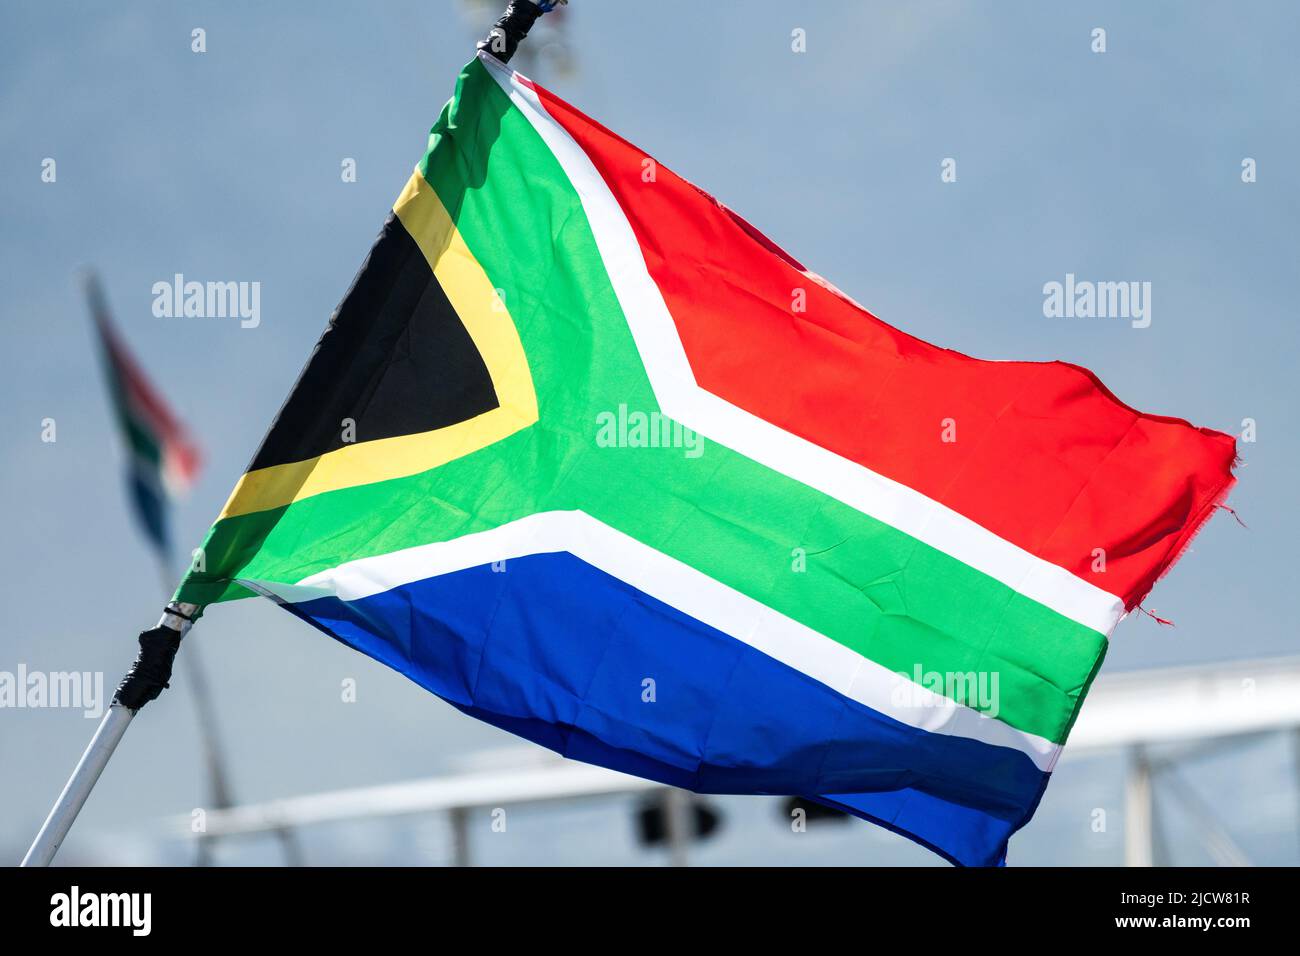 South African national flag open, unfurled concept national pride, citizenship, national identity Stock Photo